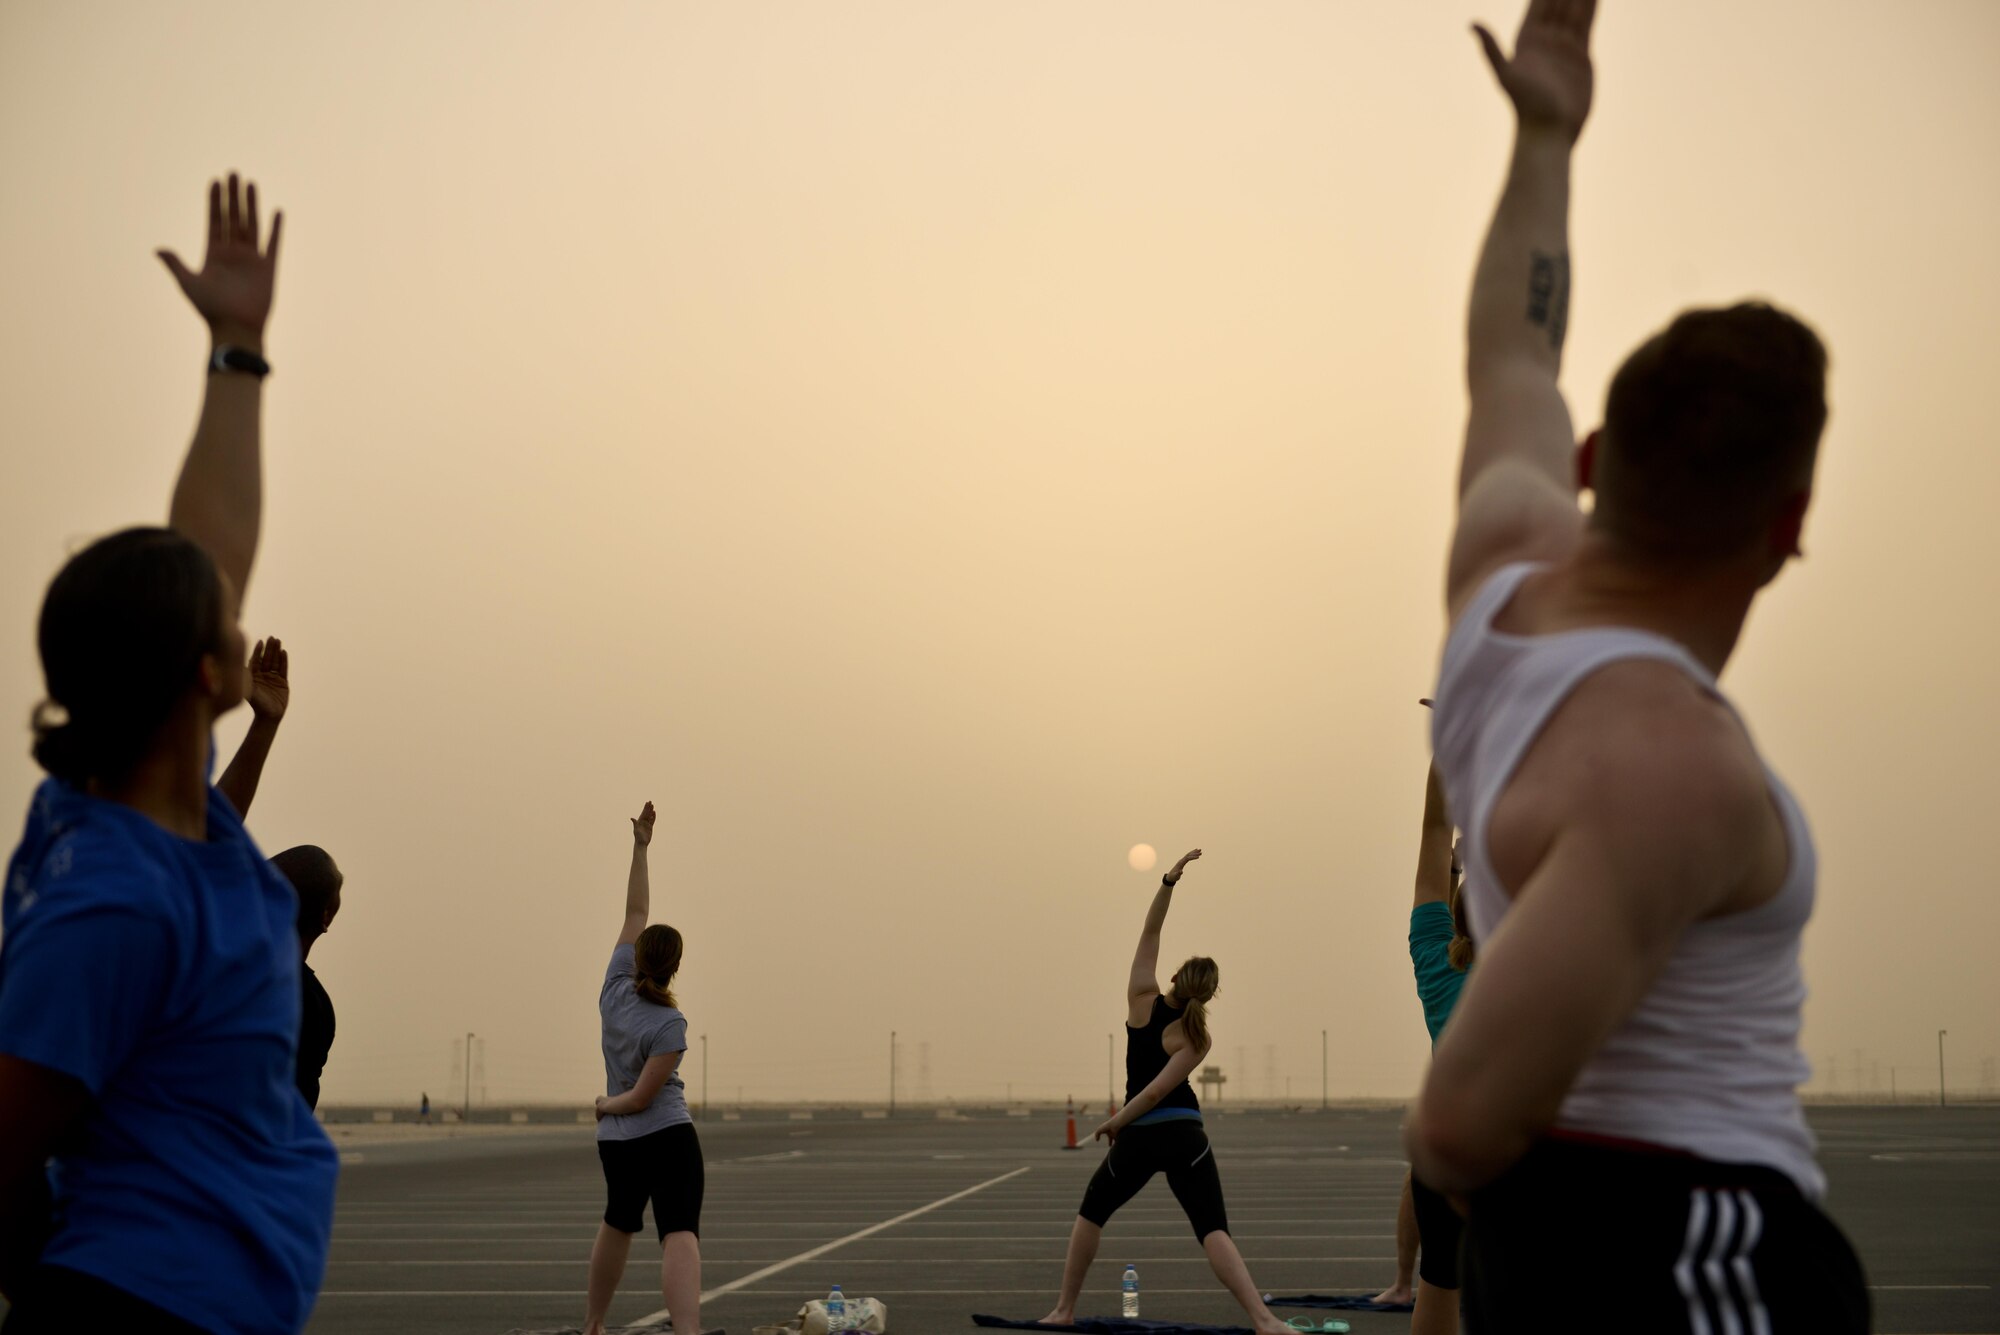 Deployed Soldiers, sailors, airmen, marines, coalition partners and civilians go into the Reverse Warrior pose during the largest Yoga session to take place in Qatar history July 11, 2015 Al Udeid Air Base, Qatar. This event opened its doors to all levels of practitioners from novice to expert. It allowed the fine men and women assigned to Al Udeid Air Base to relax and enjoy a different kind of exercise in a neutral environment. (U.S. Air Force photo/Staff Sgt. Alexandre Montes)